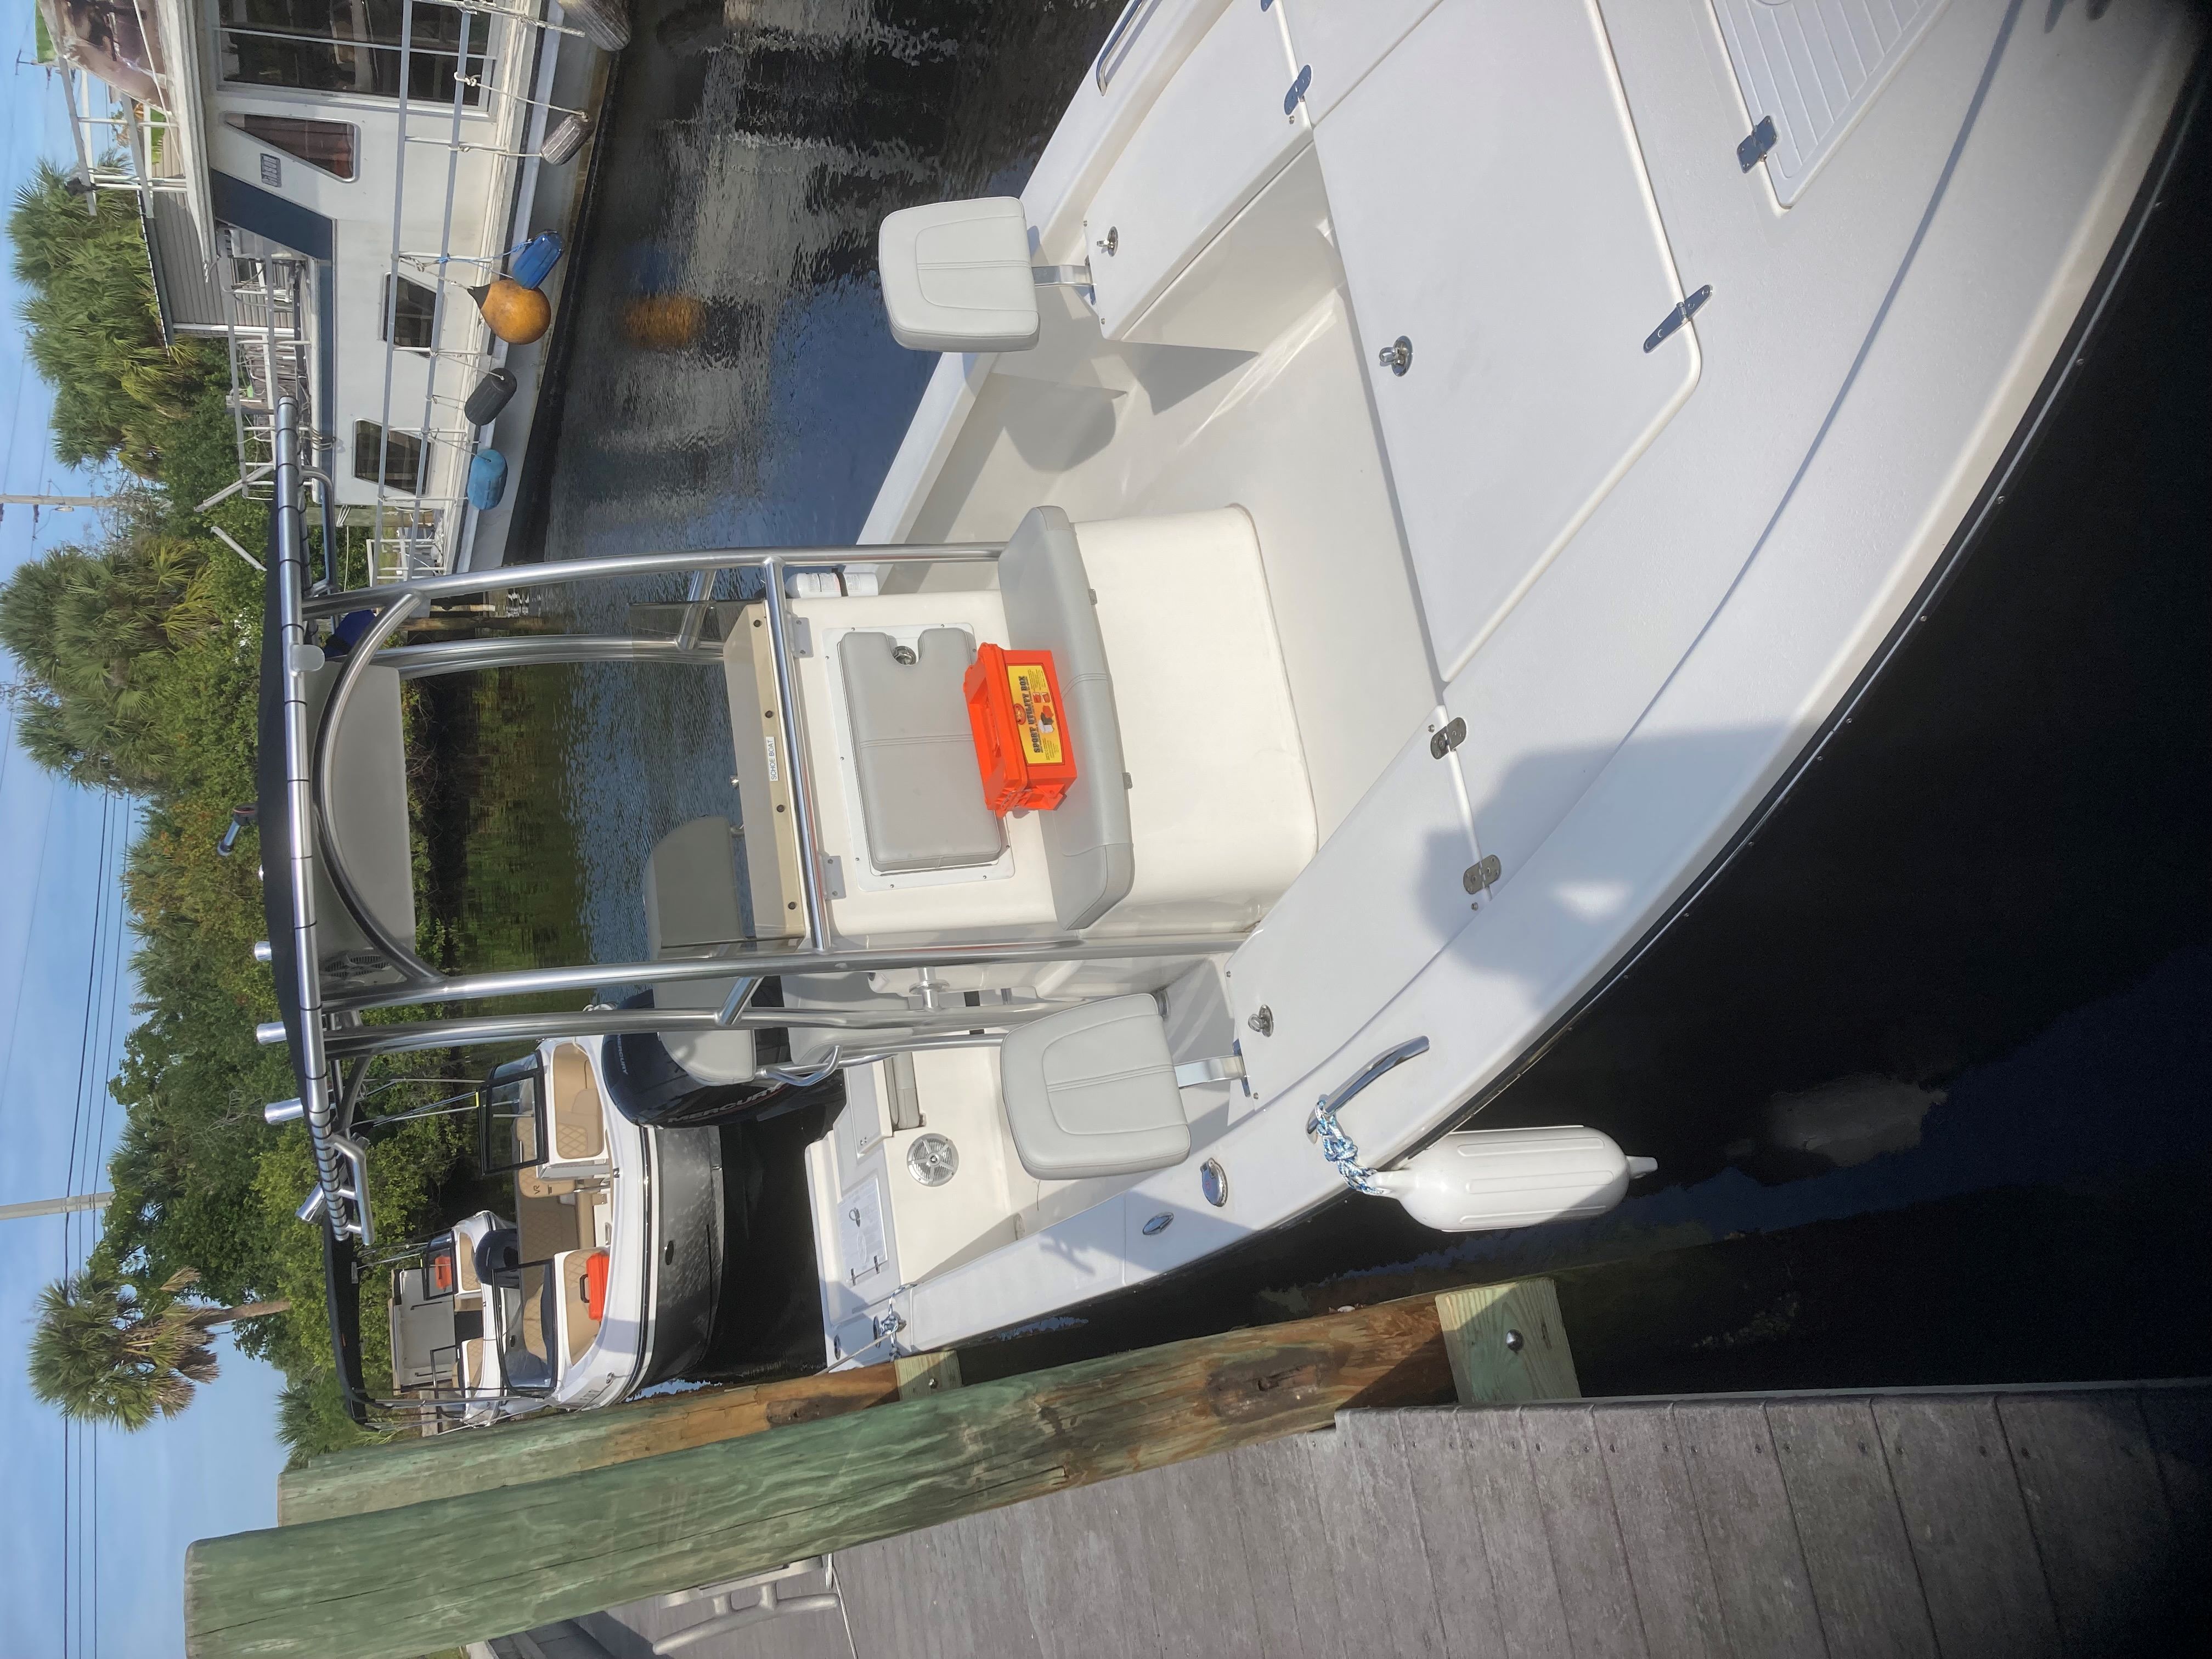 SCHOE BOAT  (22FT Maycraft  Center Console - 150 HP- Near Shore Fishing)